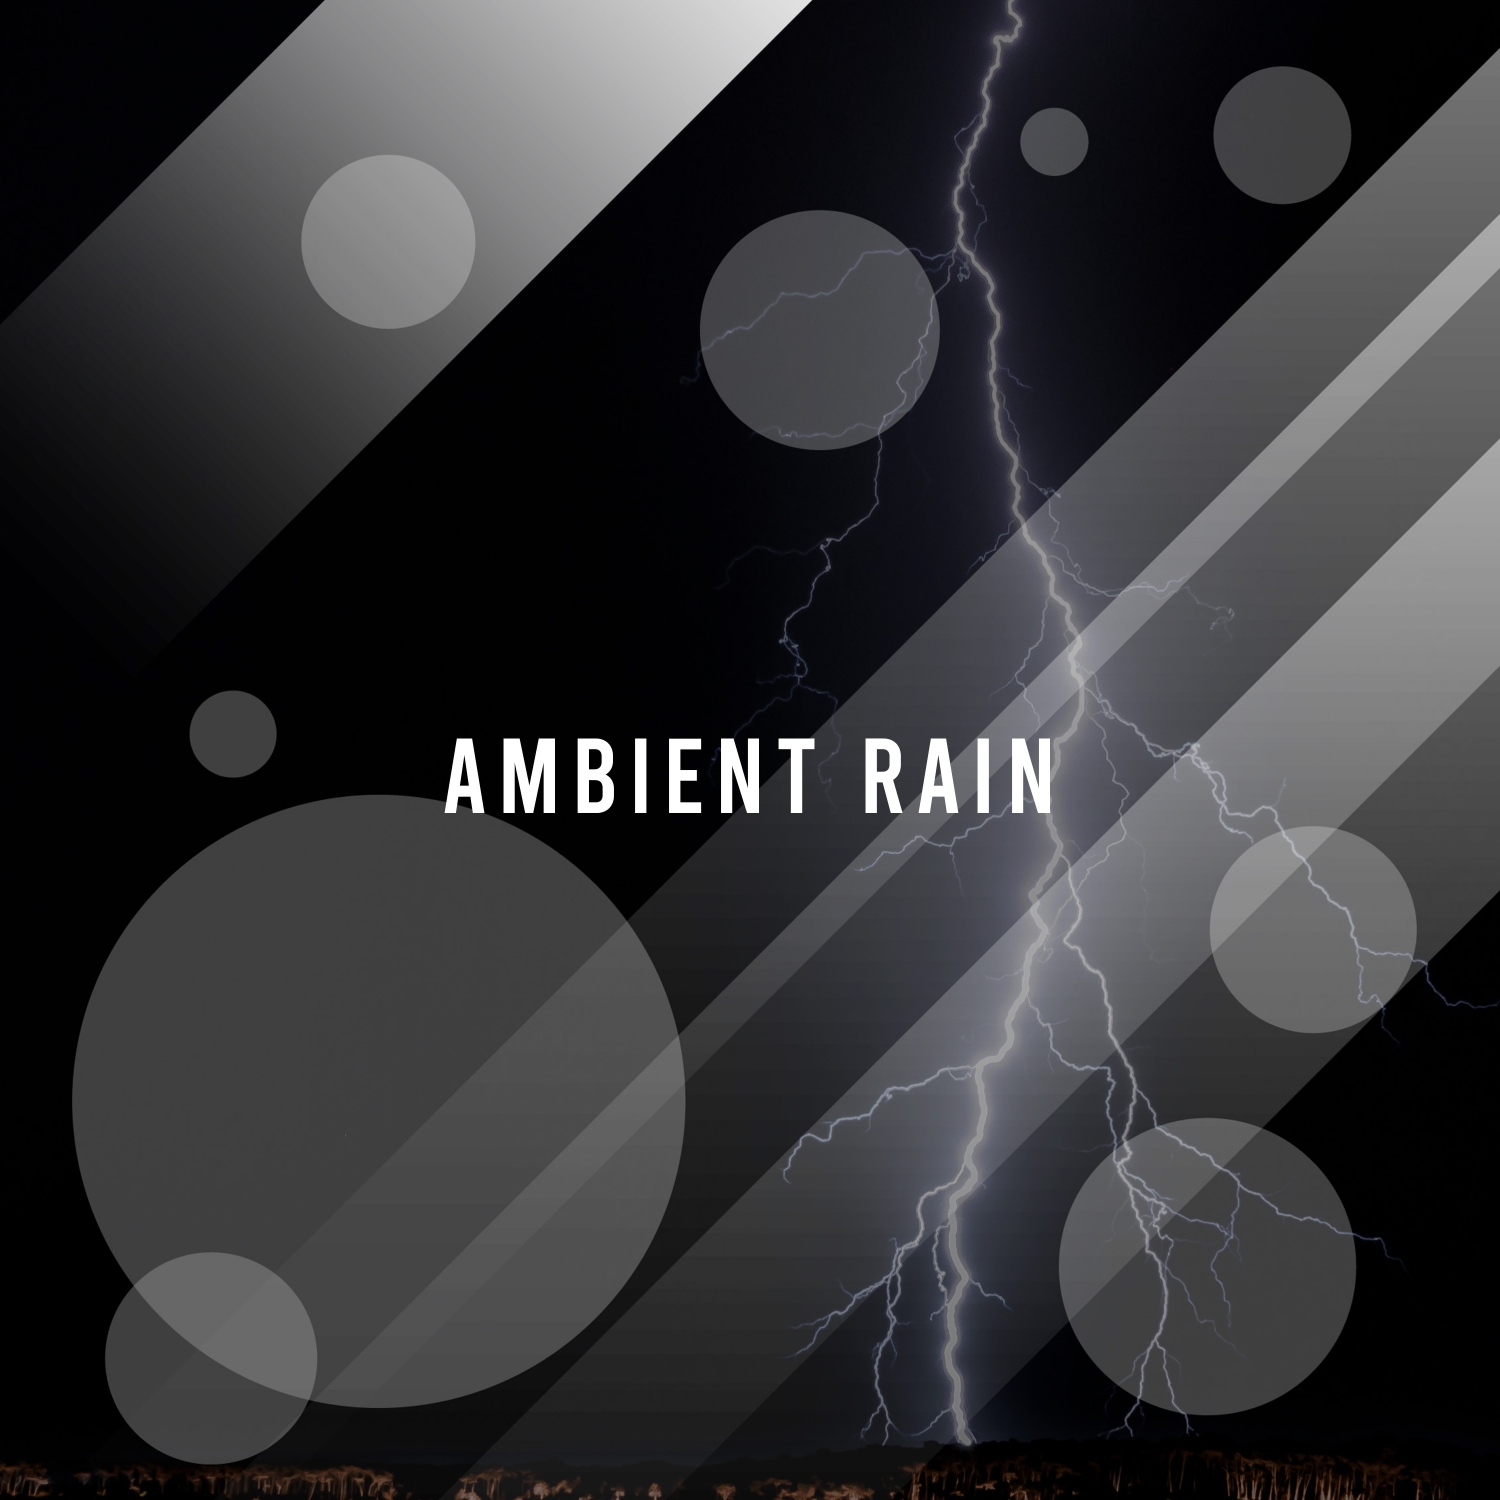 2018 Ambient Rain Collection for Mindulness